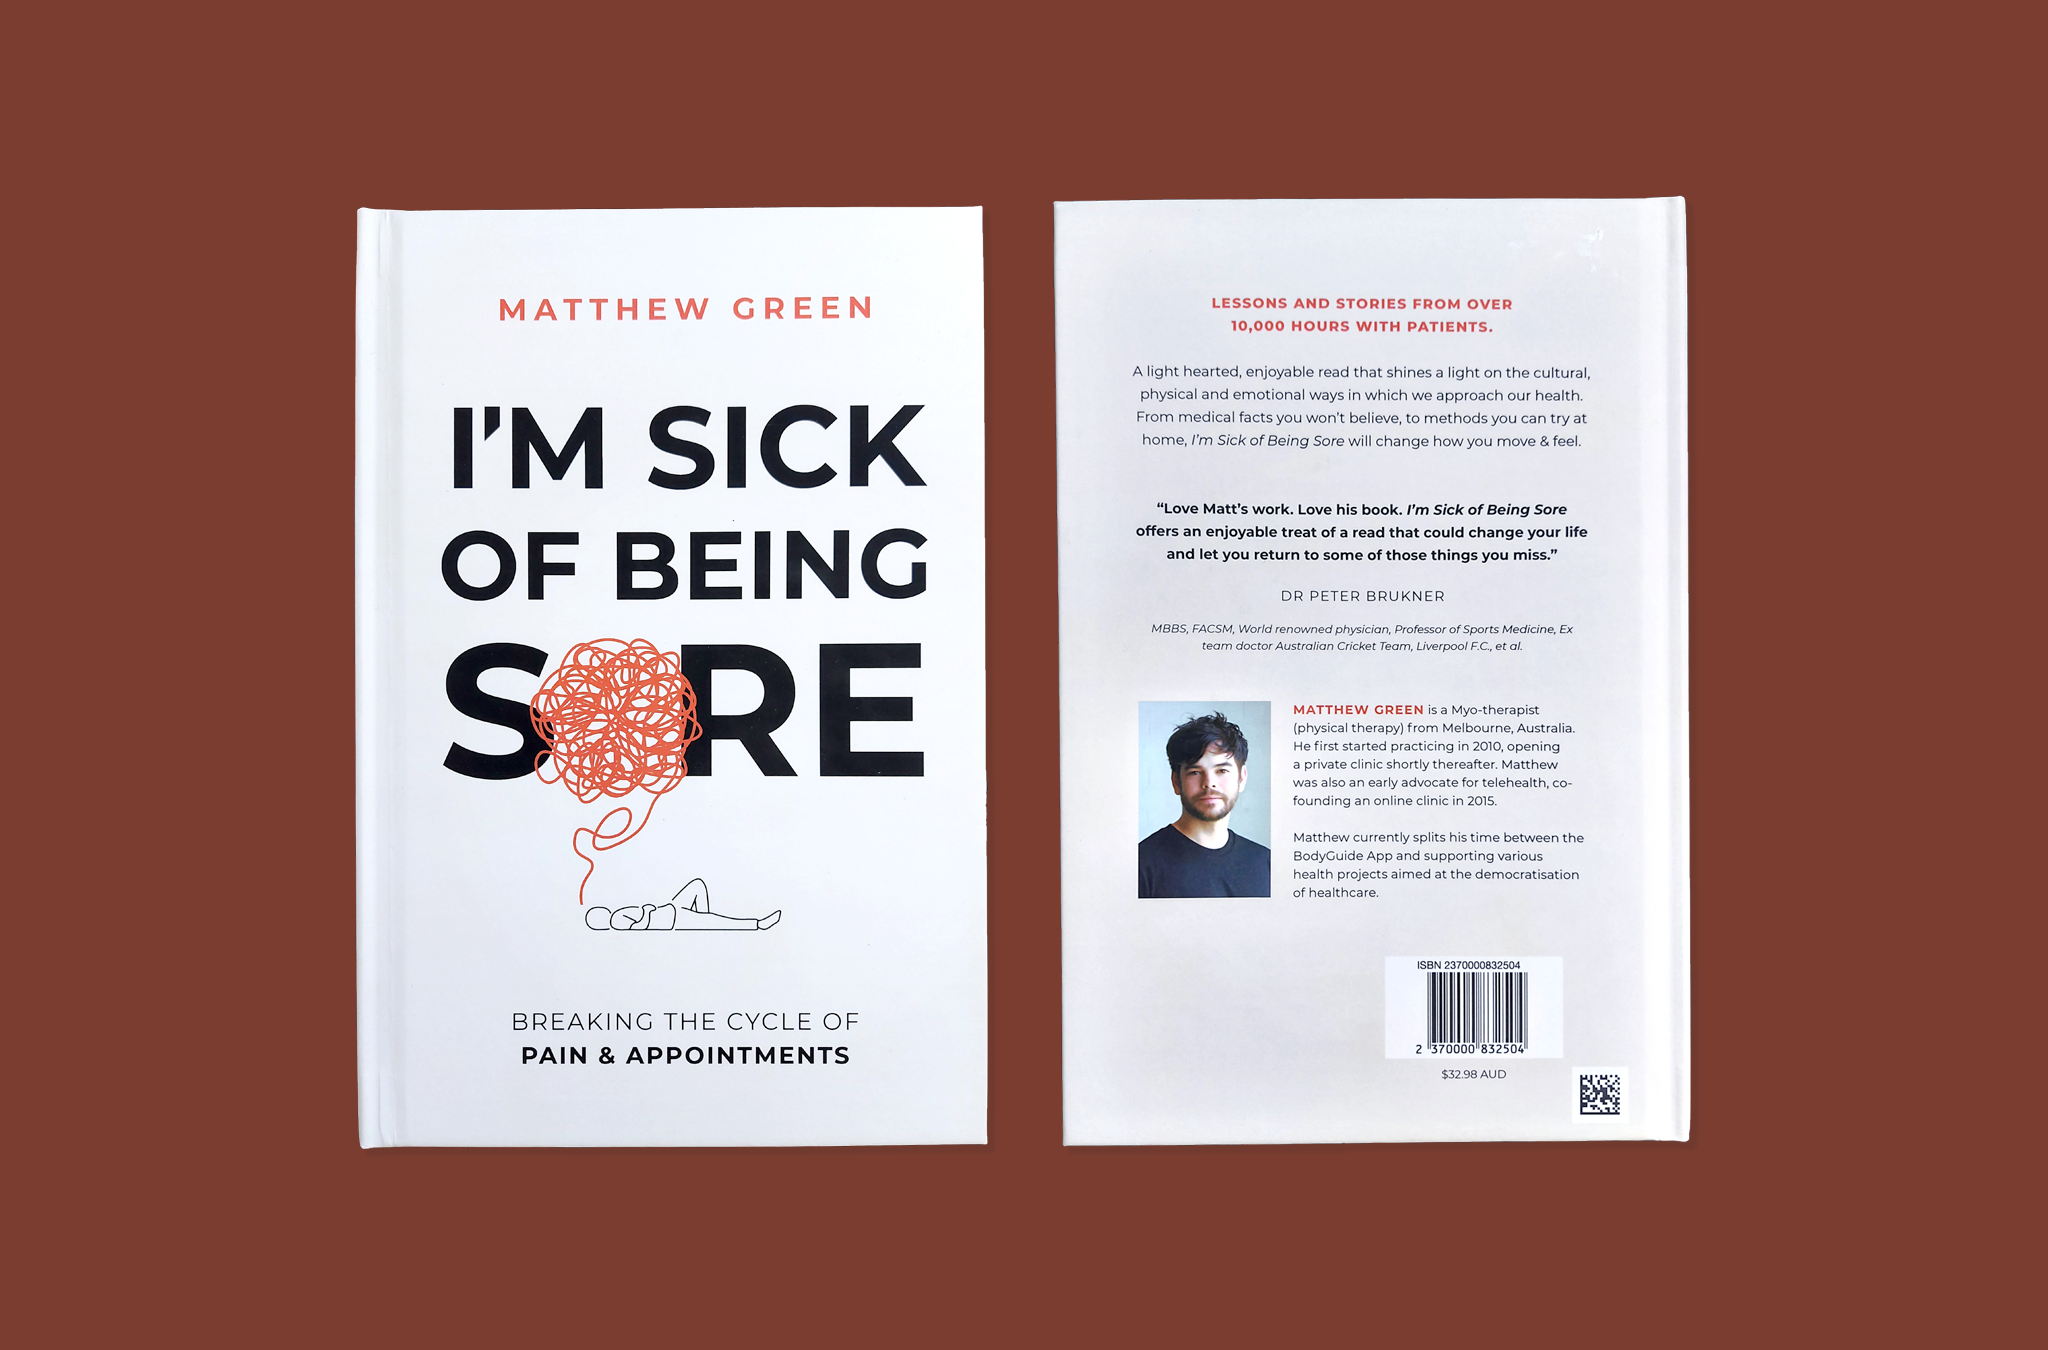 The front and back covers of the book, I'm Sick Of Being Sore.